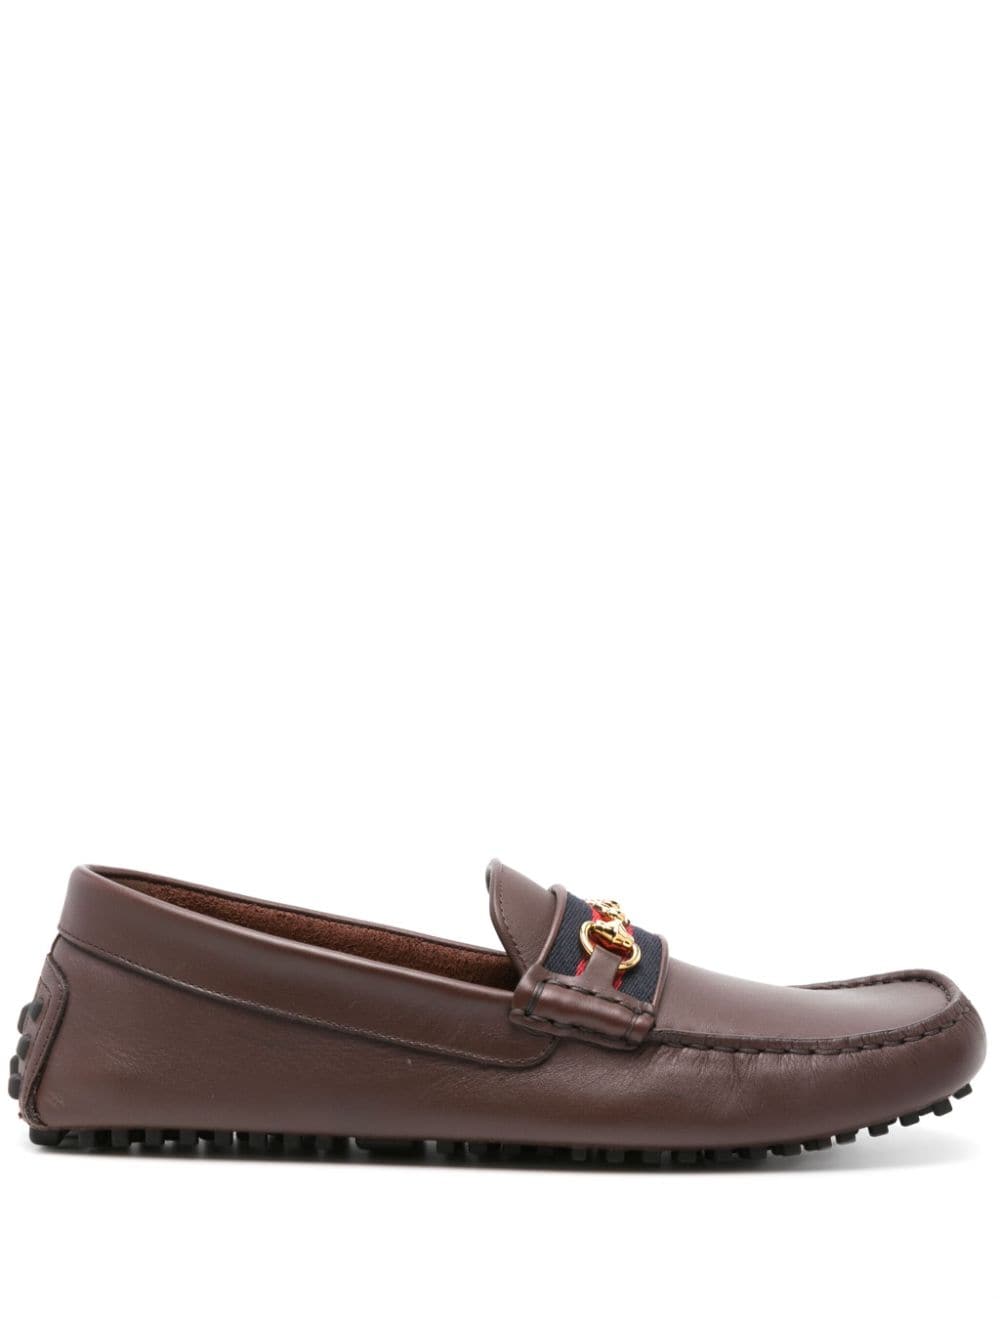 Gucci Horsebit-detail leather loafers - Brown von Gucci